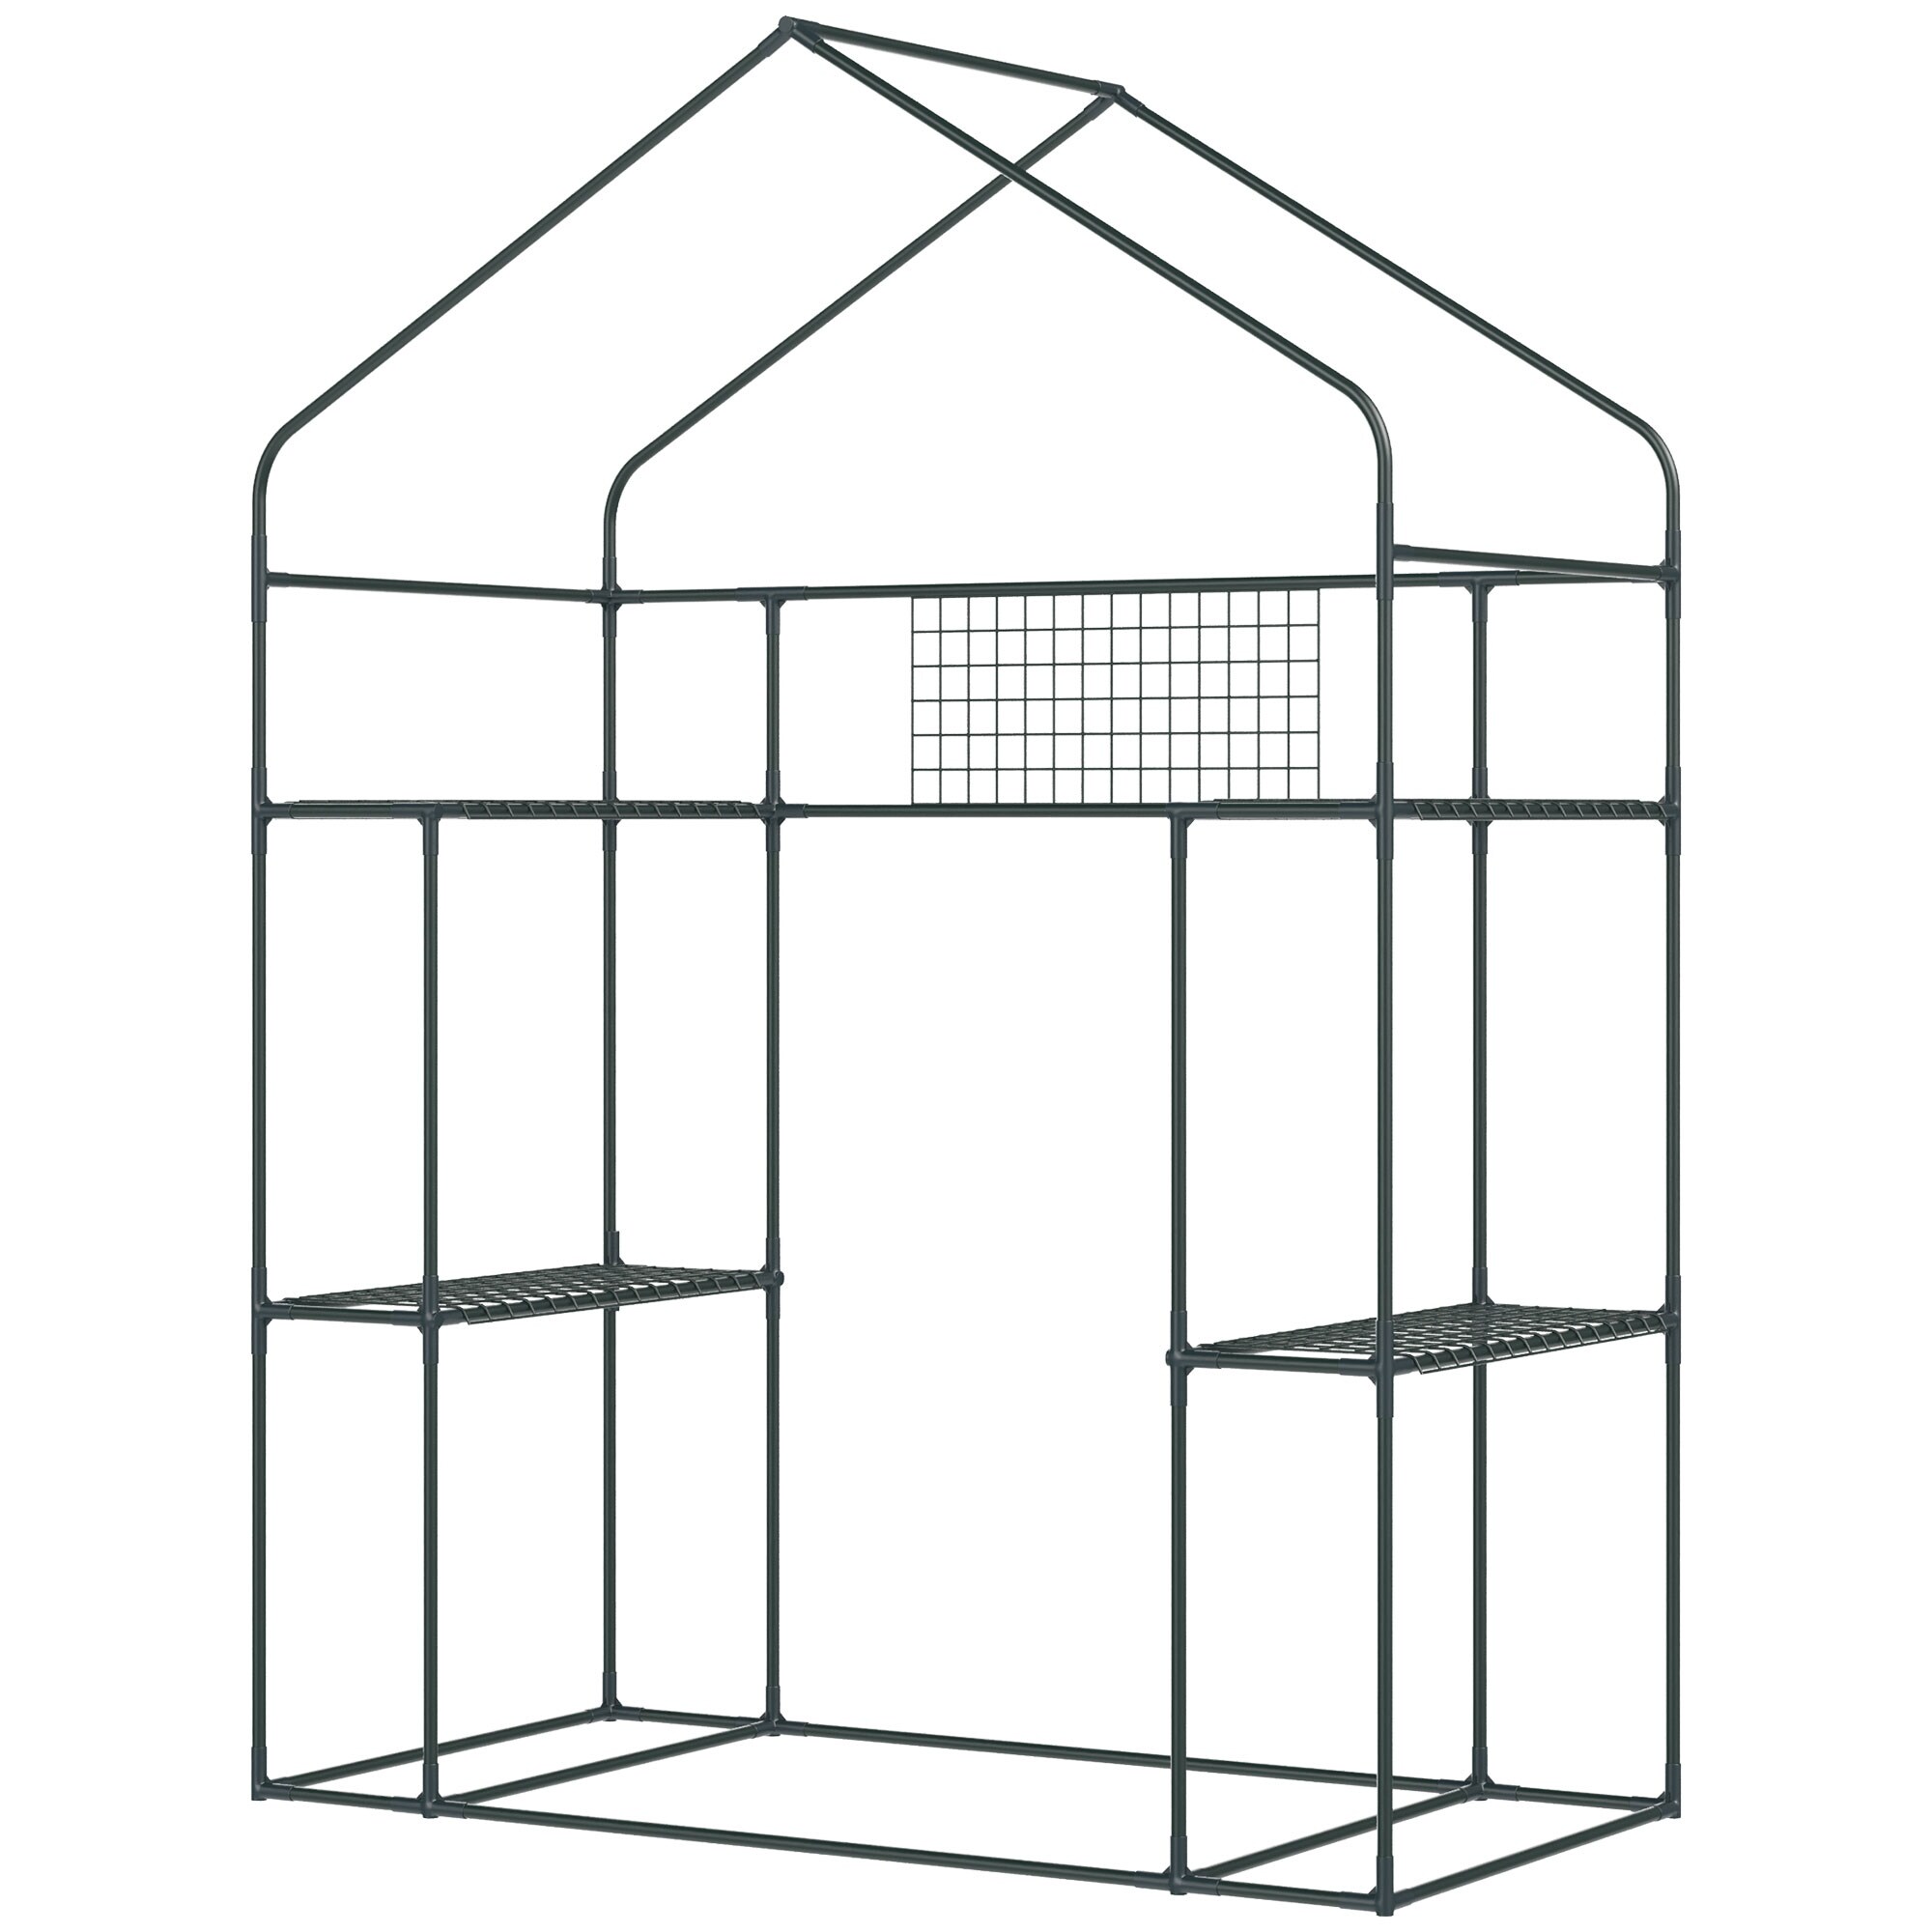 Outsunny Outdoor Walk-in Mini Greenhouse with Mesh Door & Windows, Small Portable Garden Hot House